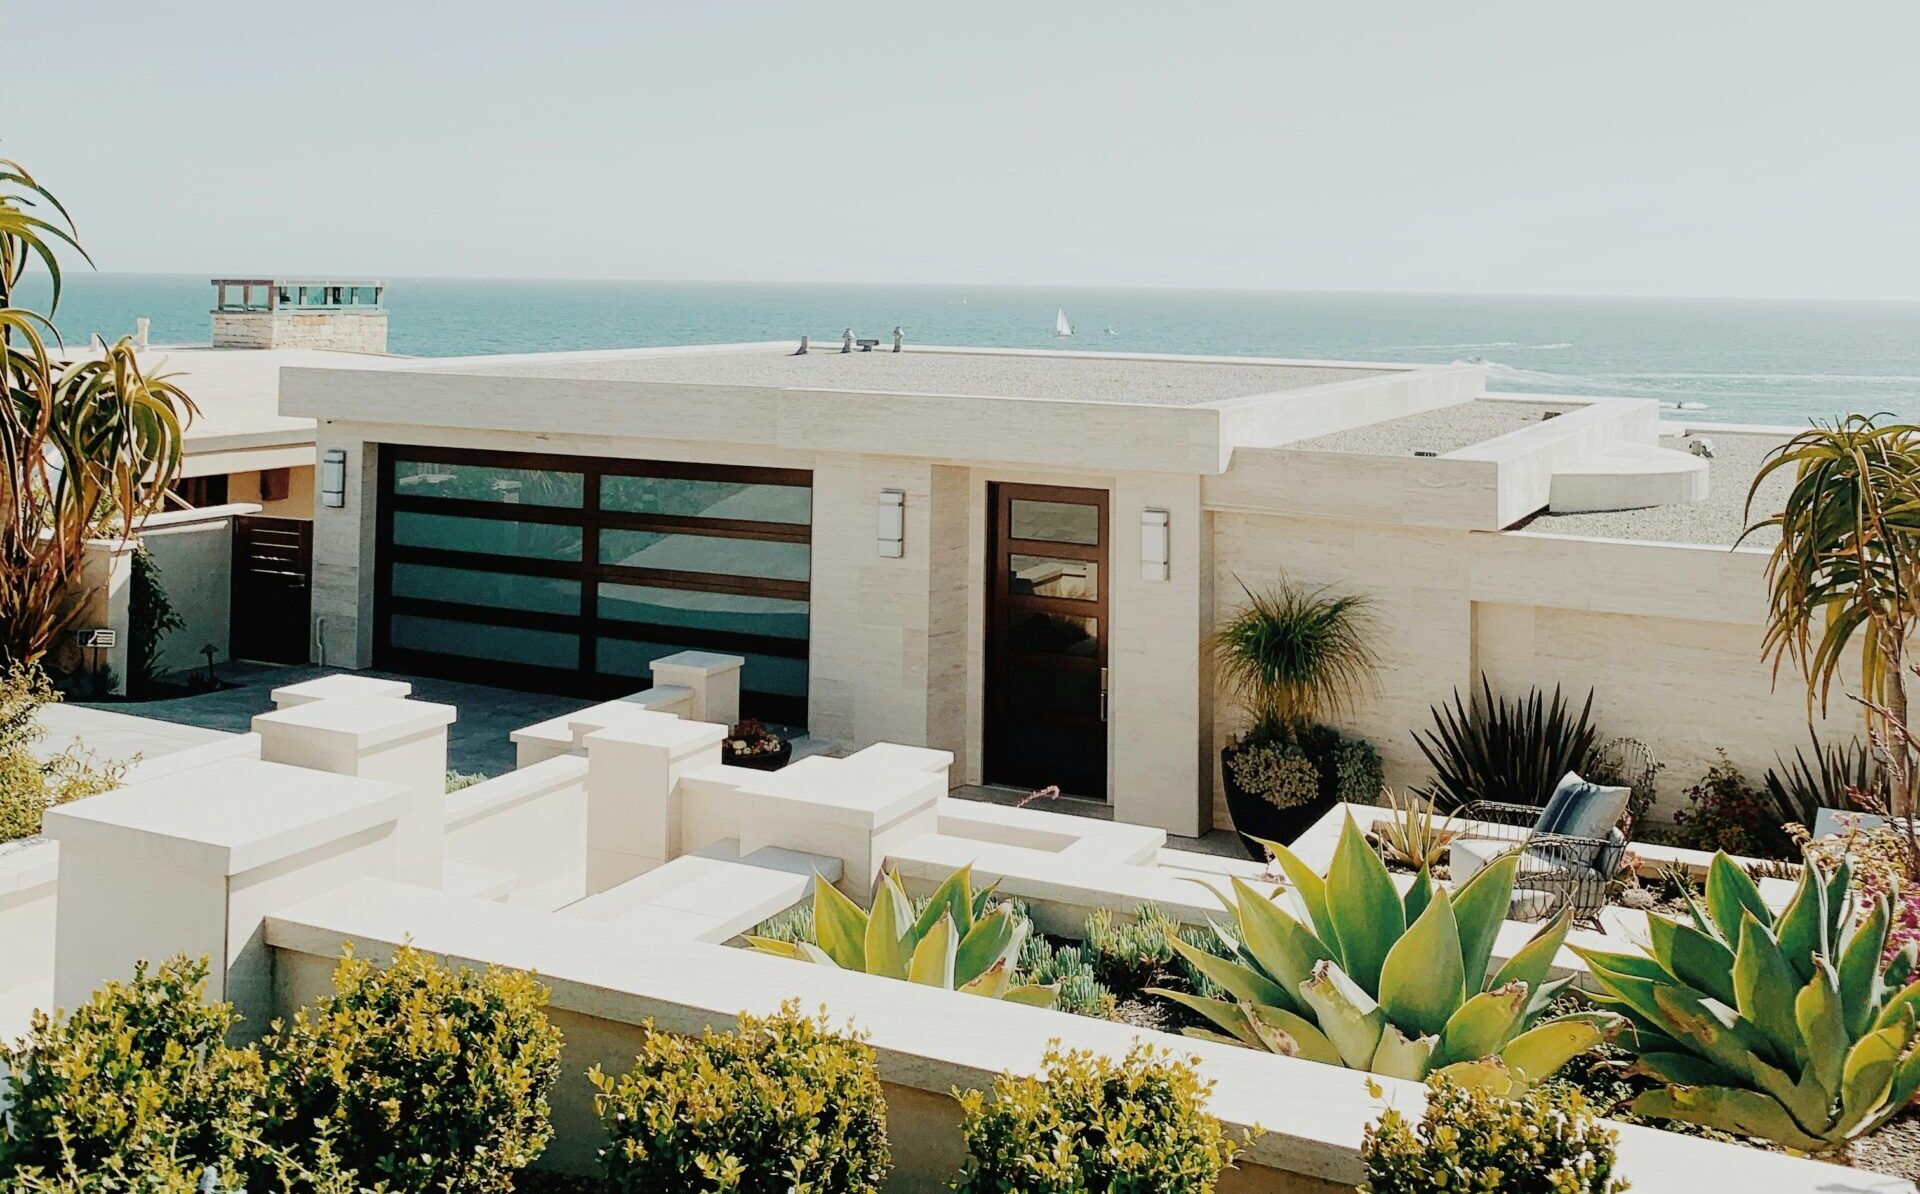 where does candace parker livePictured: a white beach house Pictured: 